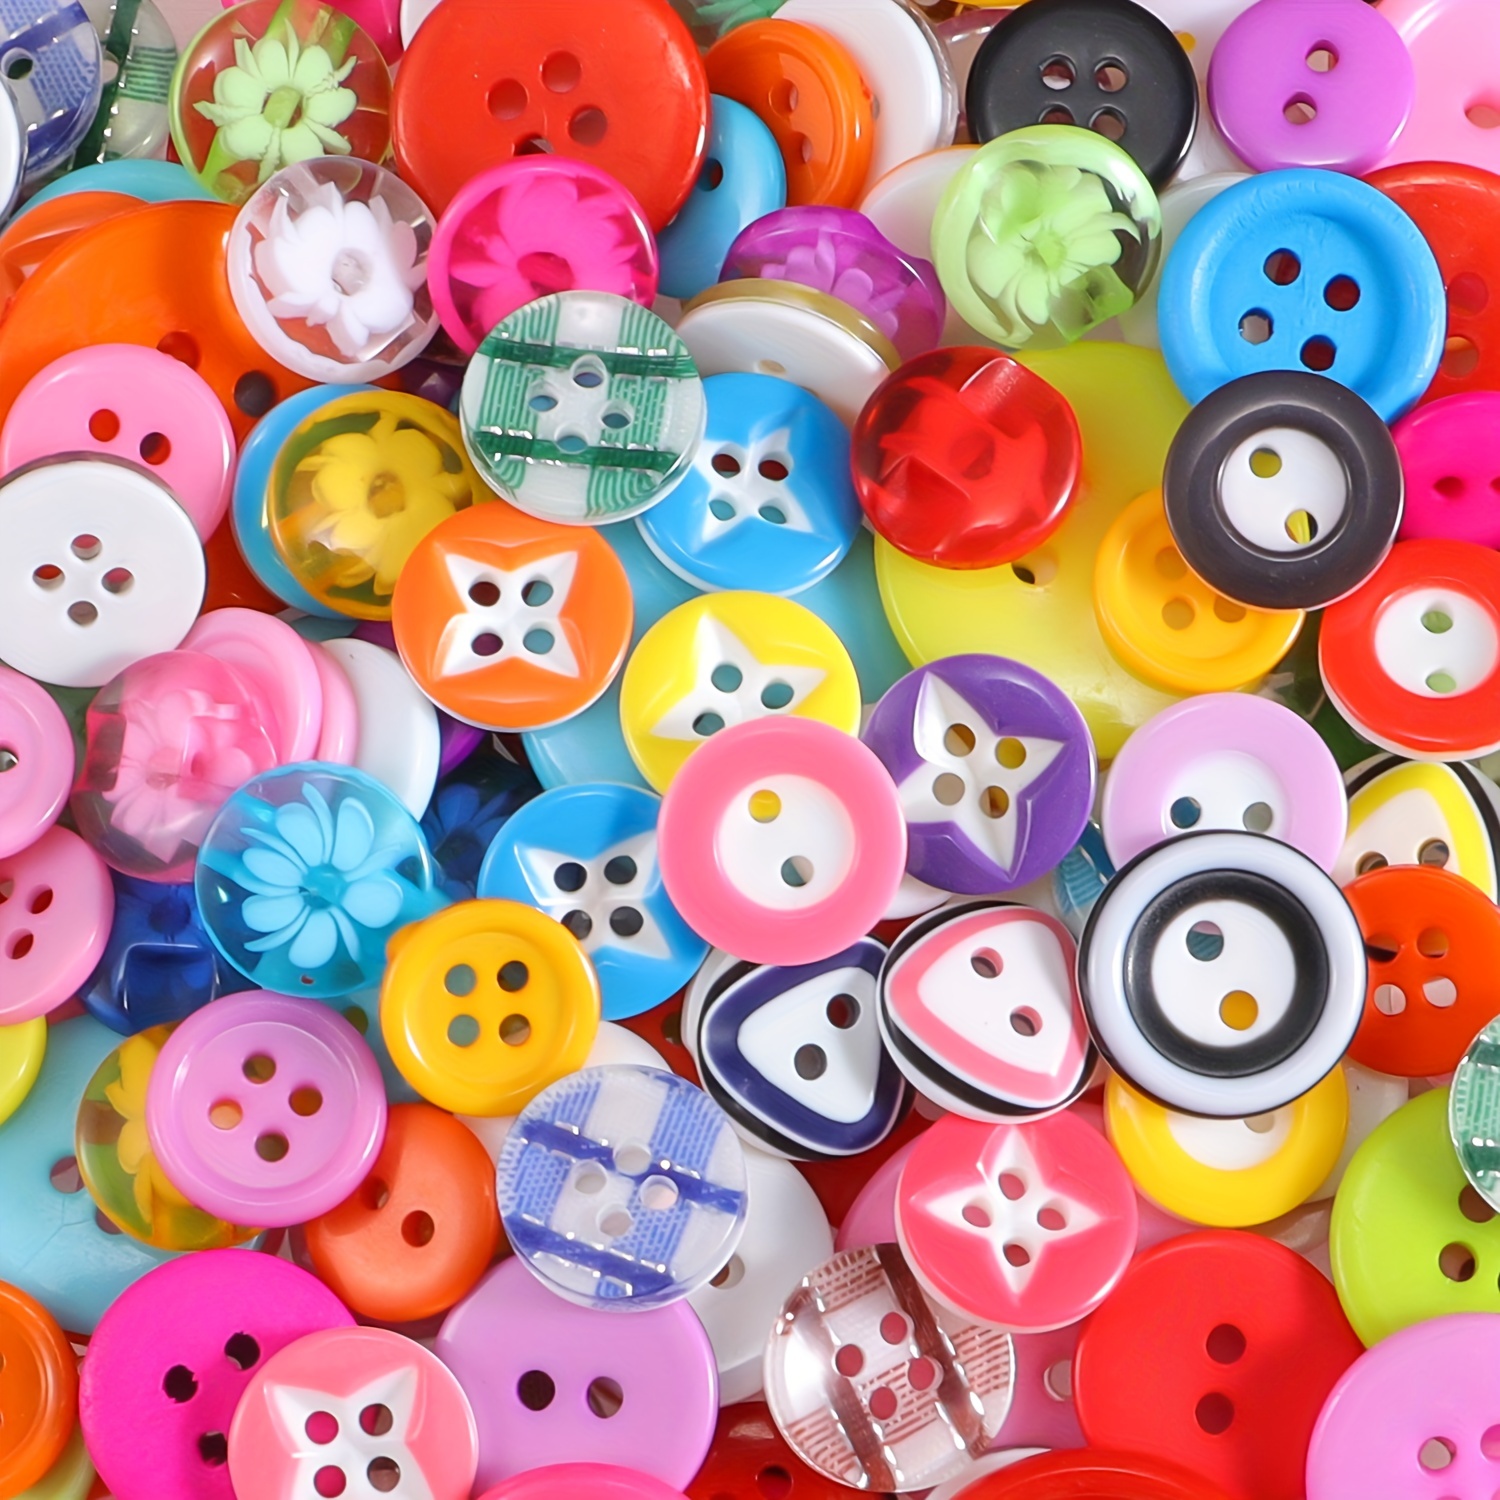 DIY Assorted Sizes Resin Buttons,Round Craft Buttons for Sewing